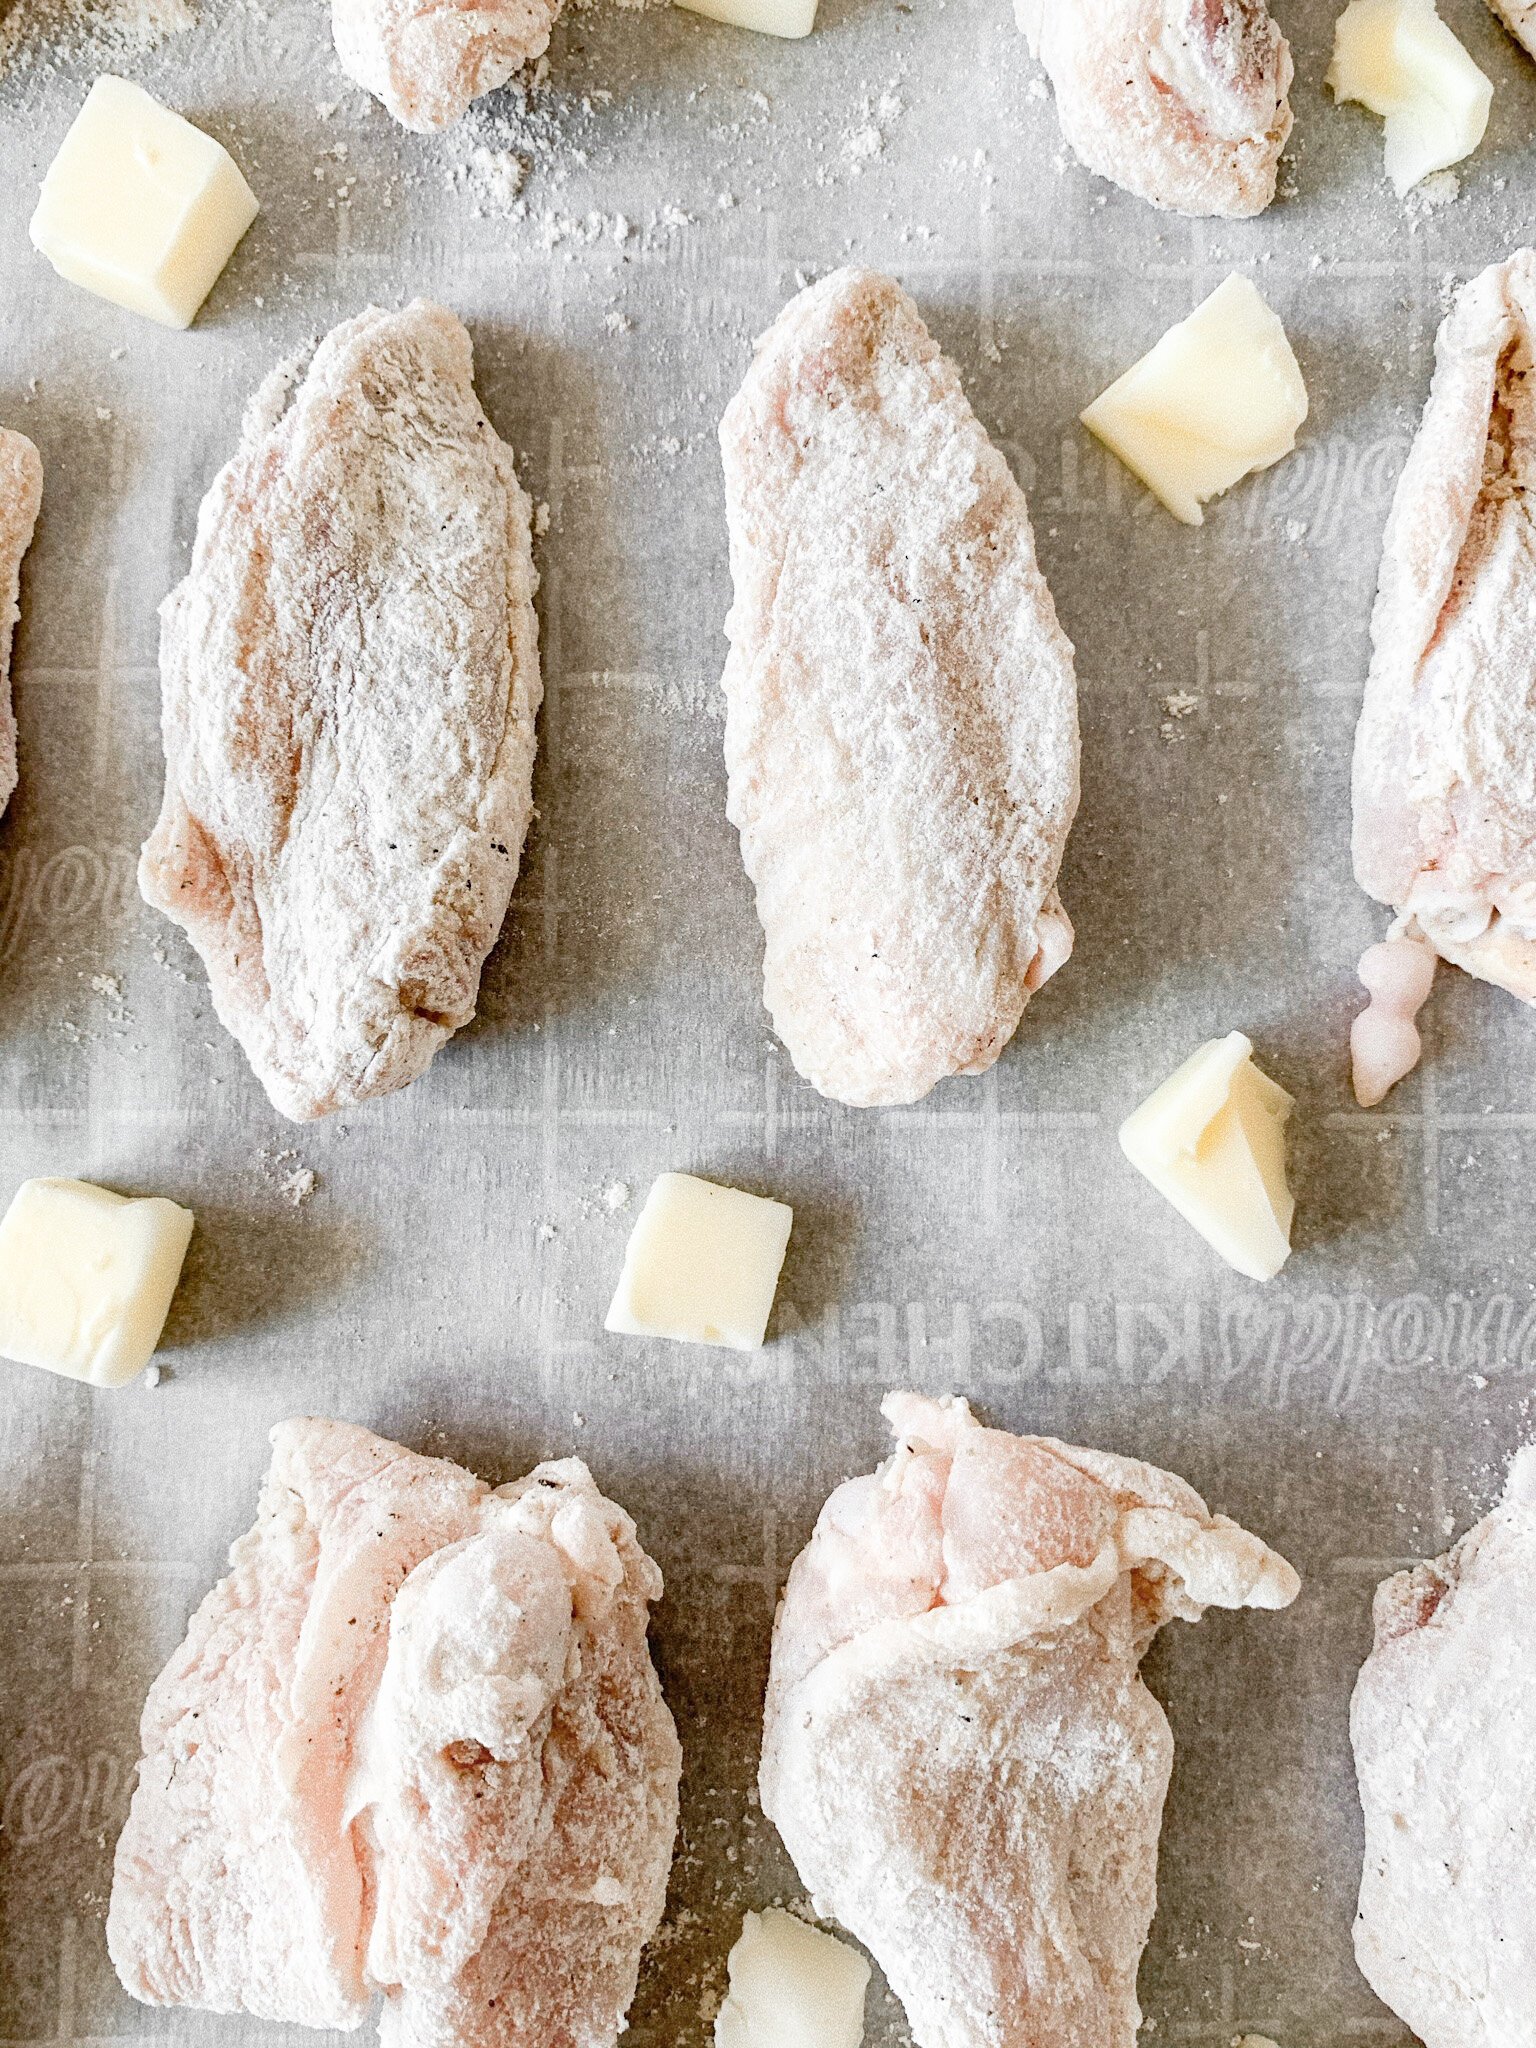 Chicken wings on a parchment lined baking sheet with knobs of butter